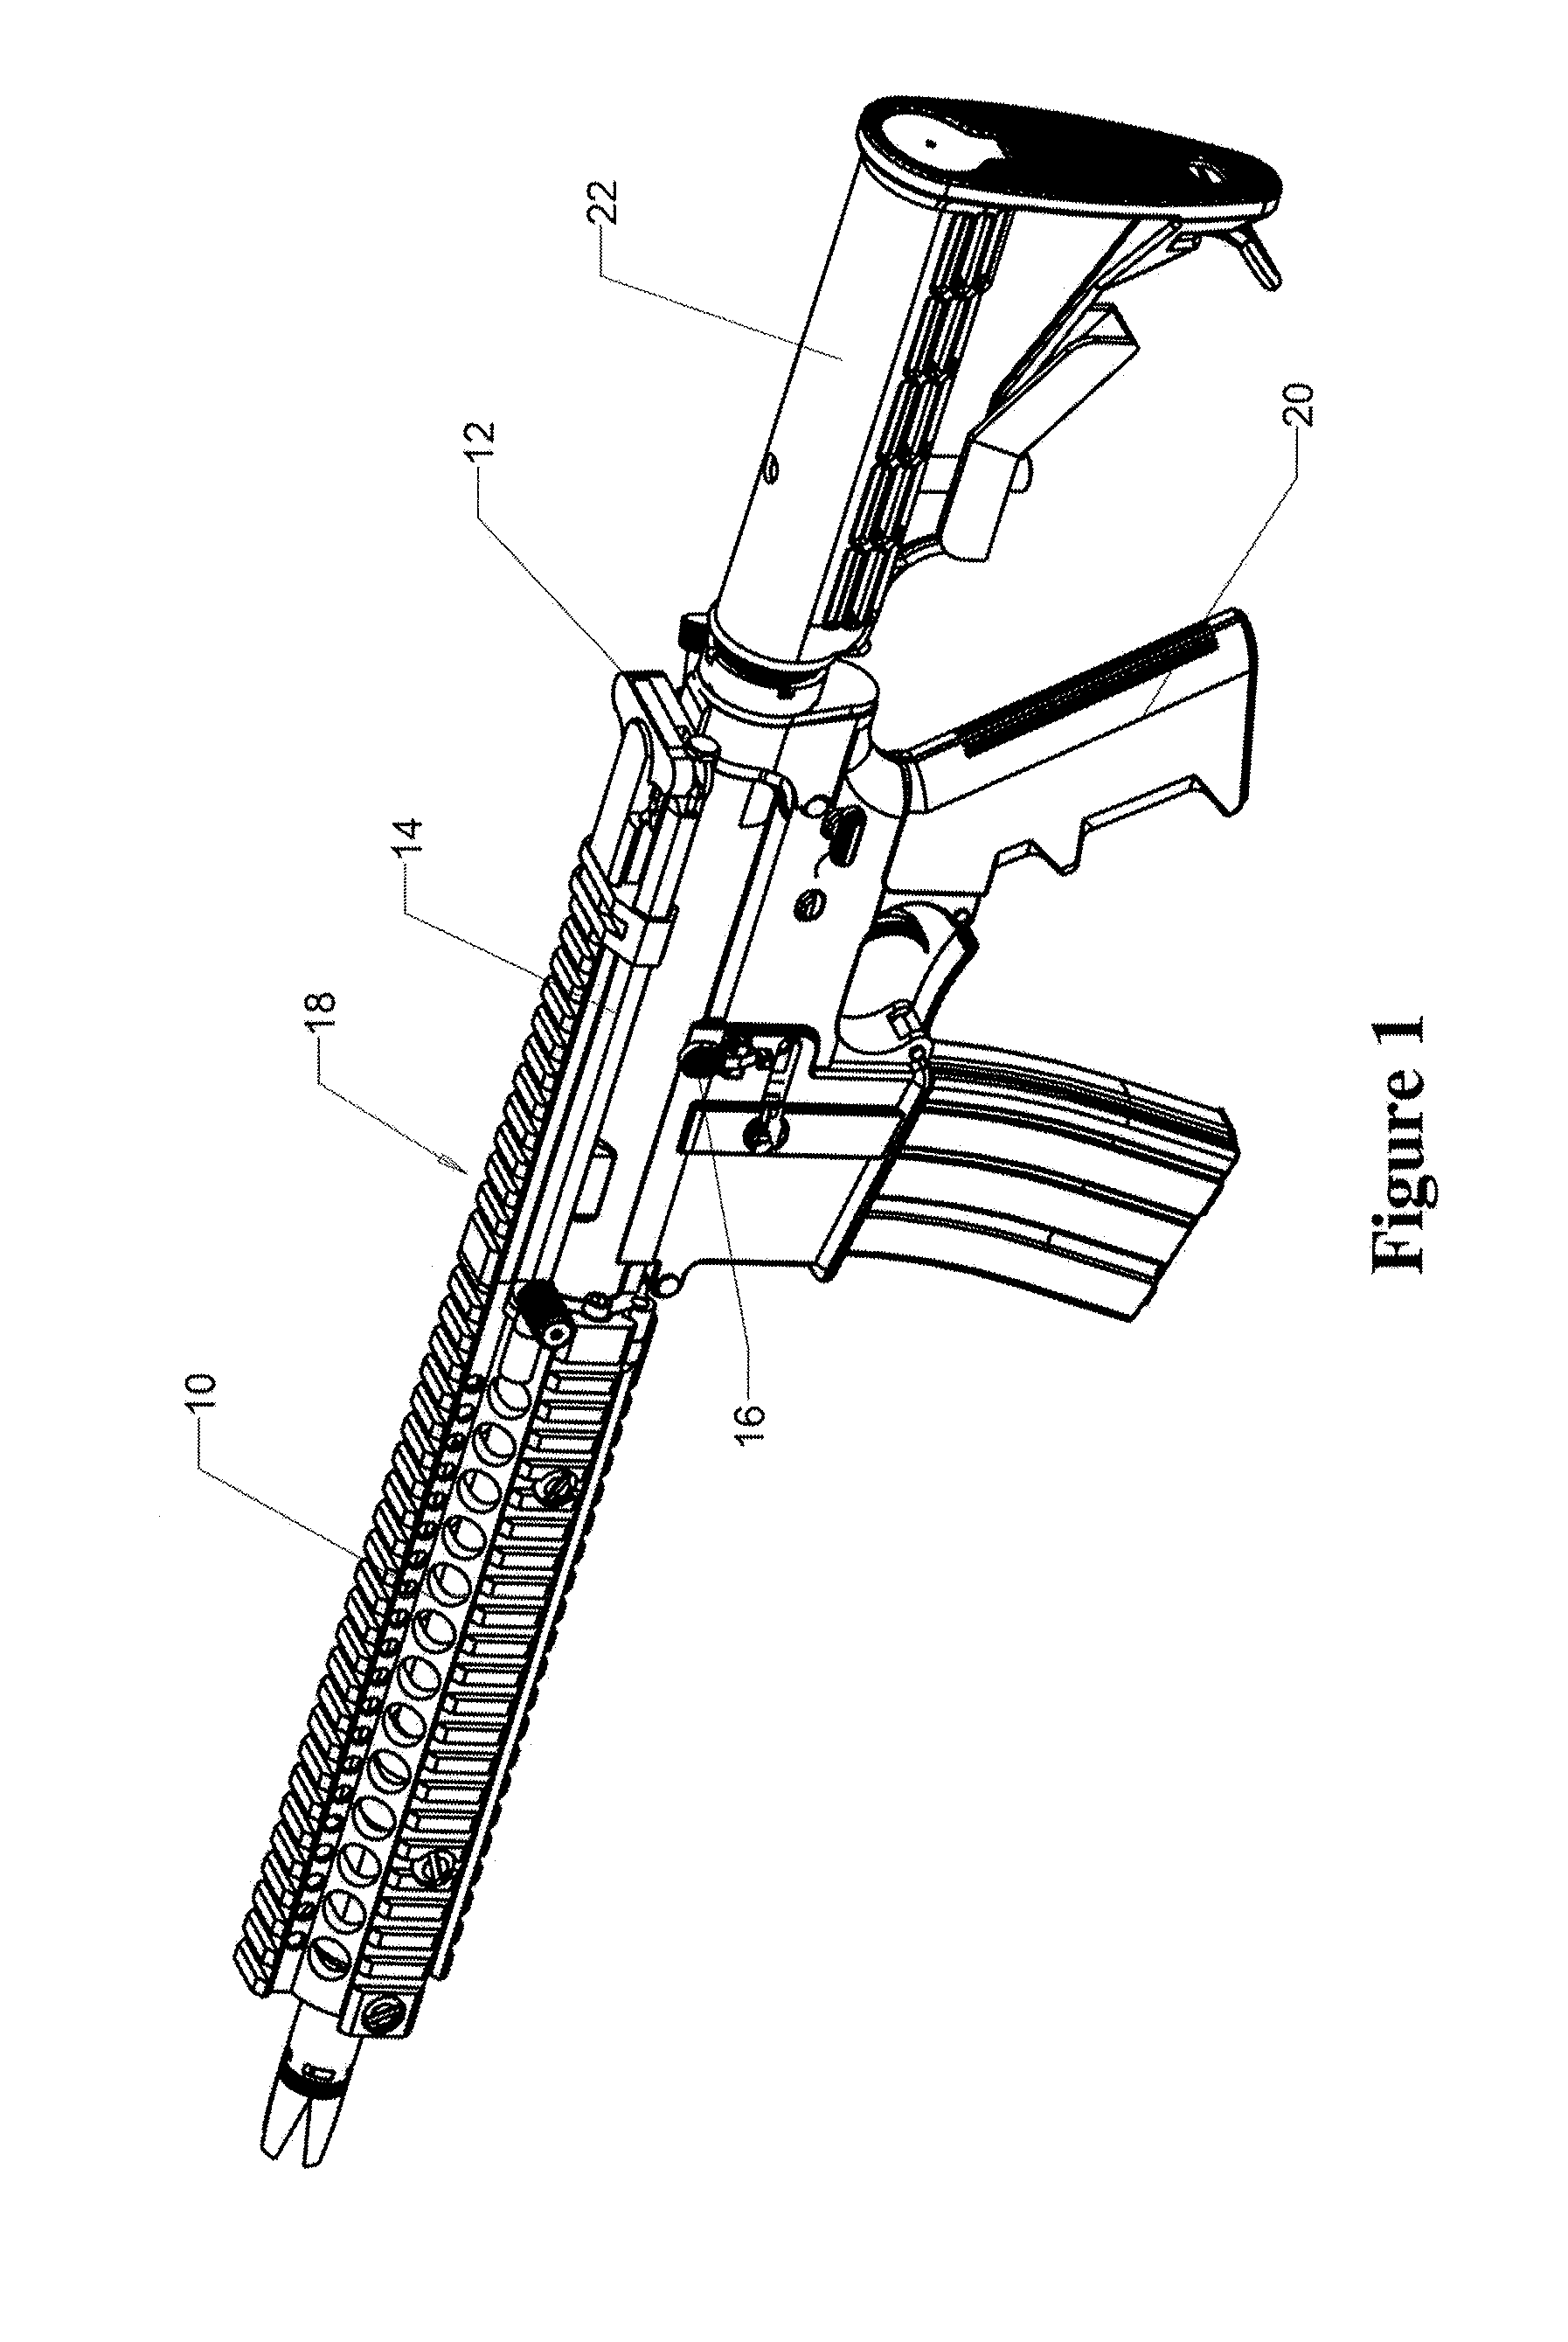 Charging Handle Accessory for Firearm